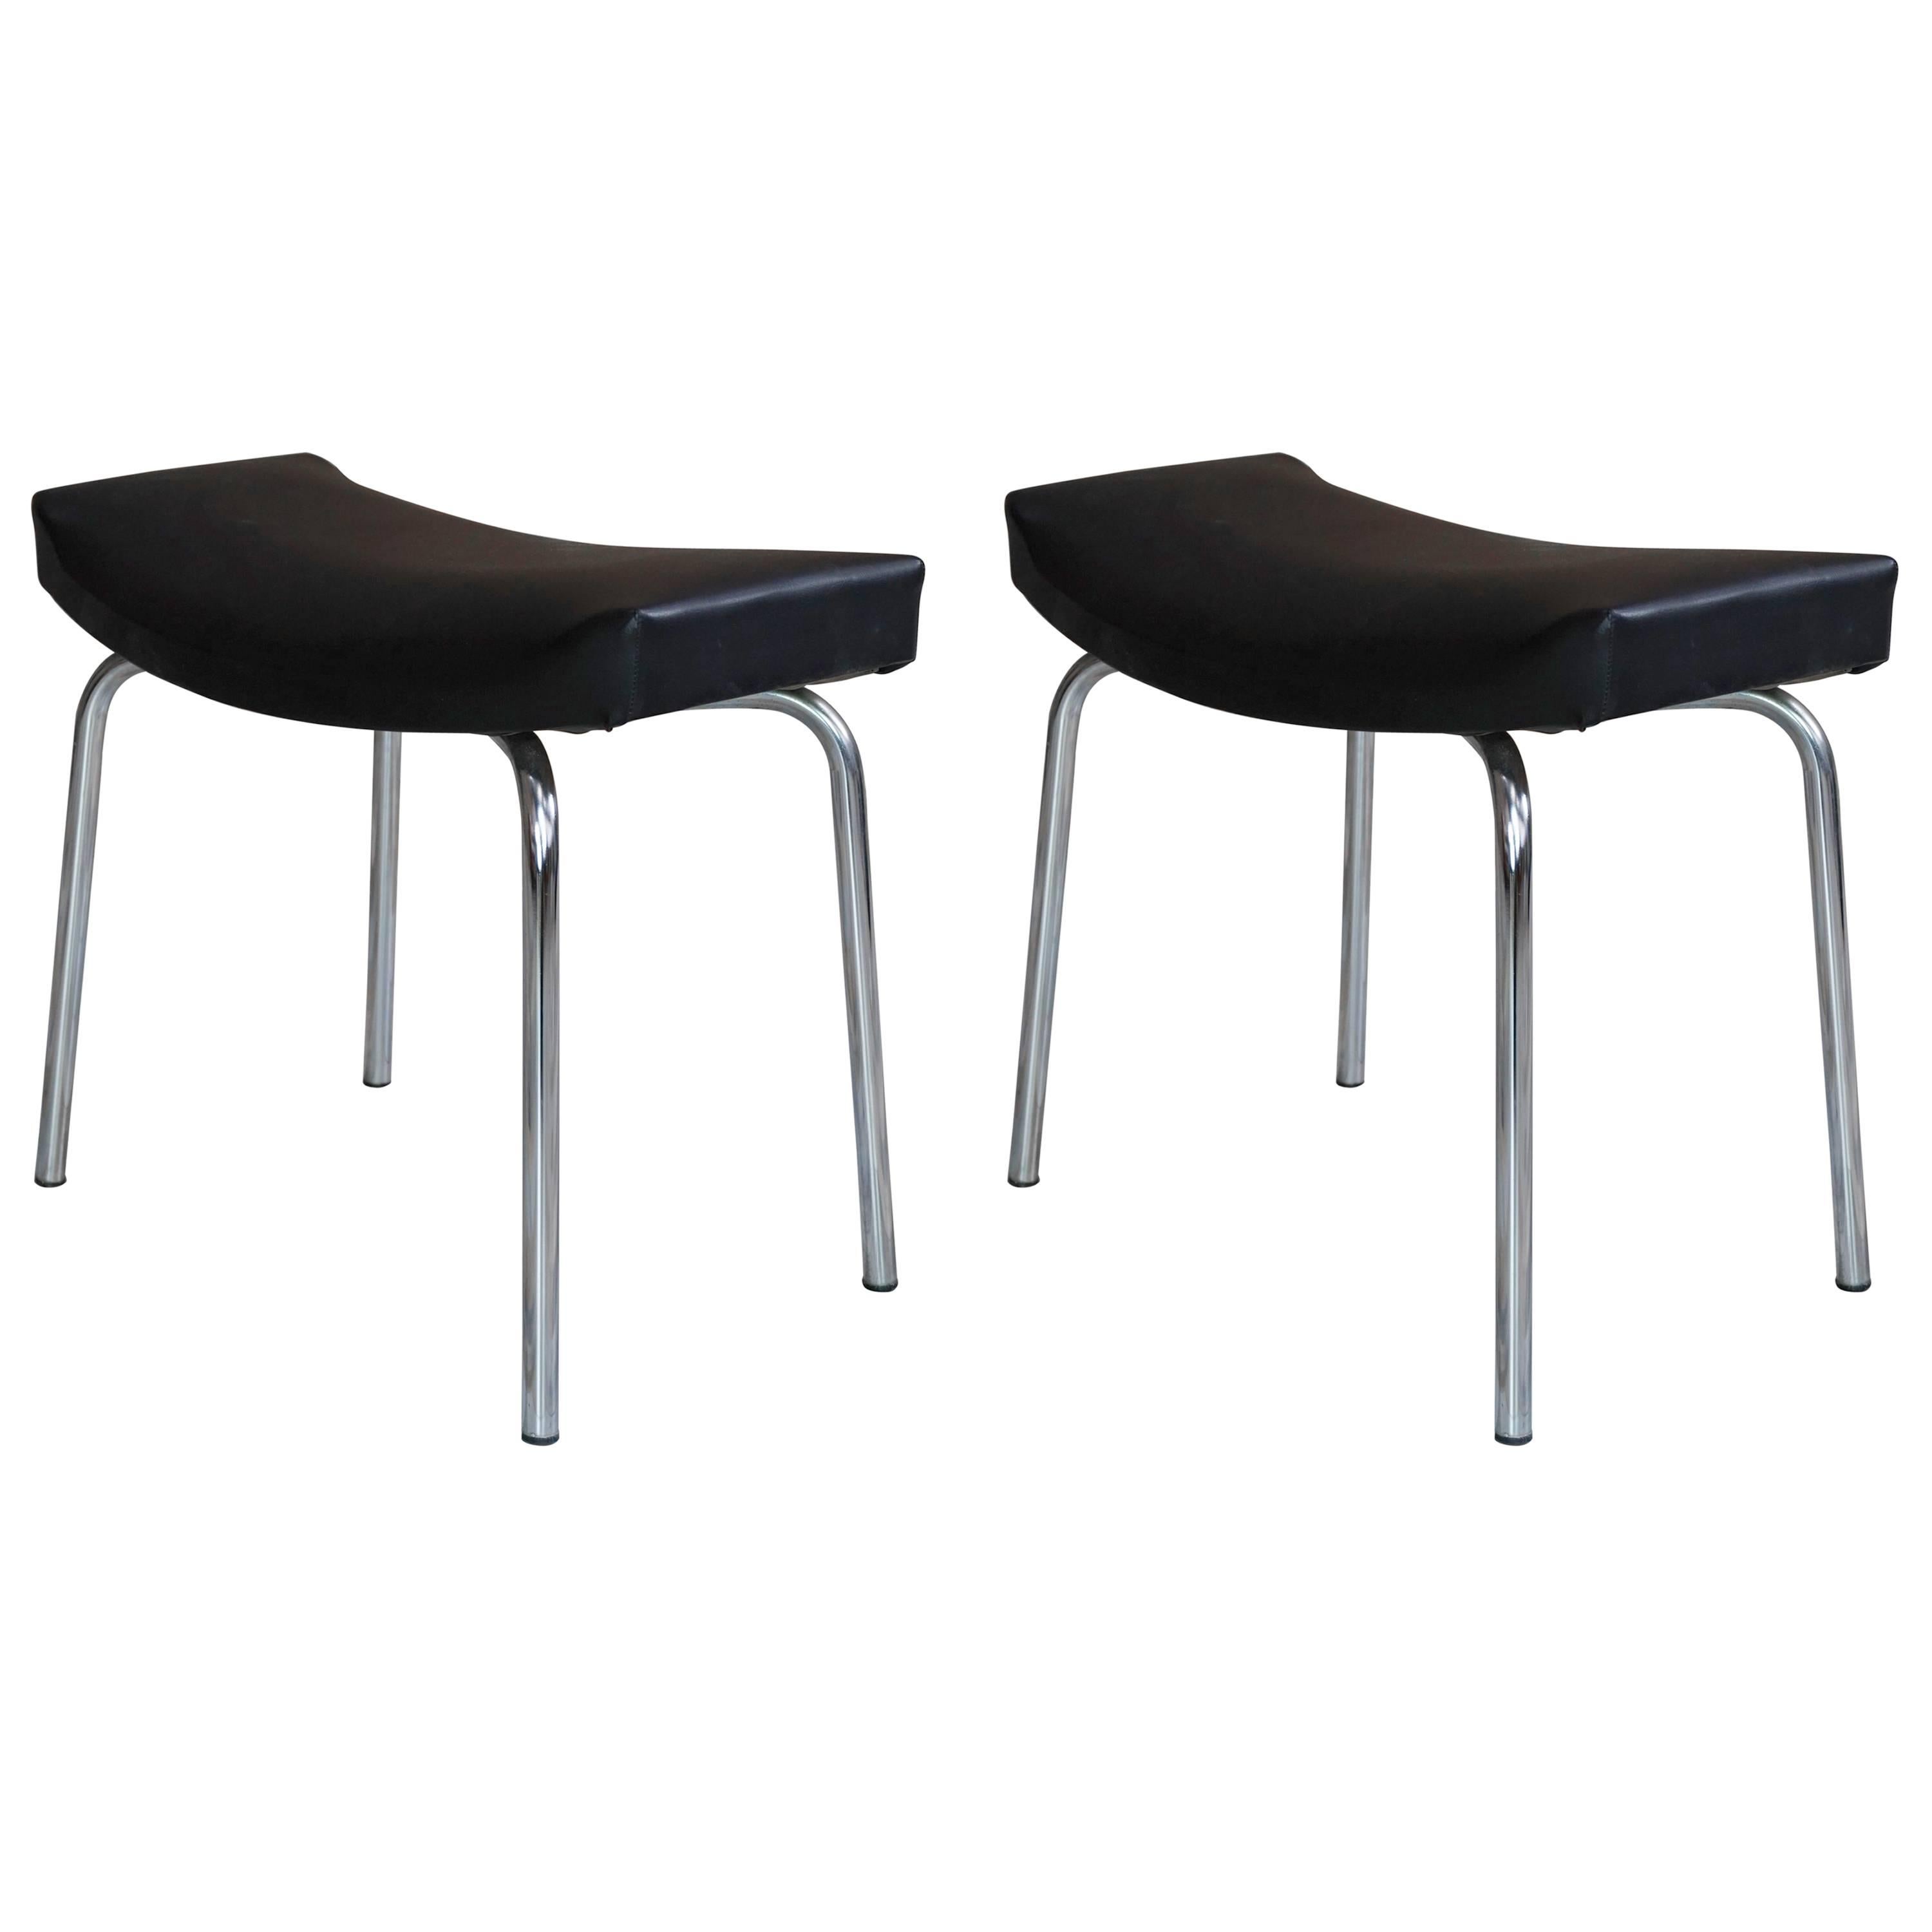 "Taureau" Pair of Stool French Design of the 1950s by Pierre Guariche for Meurop